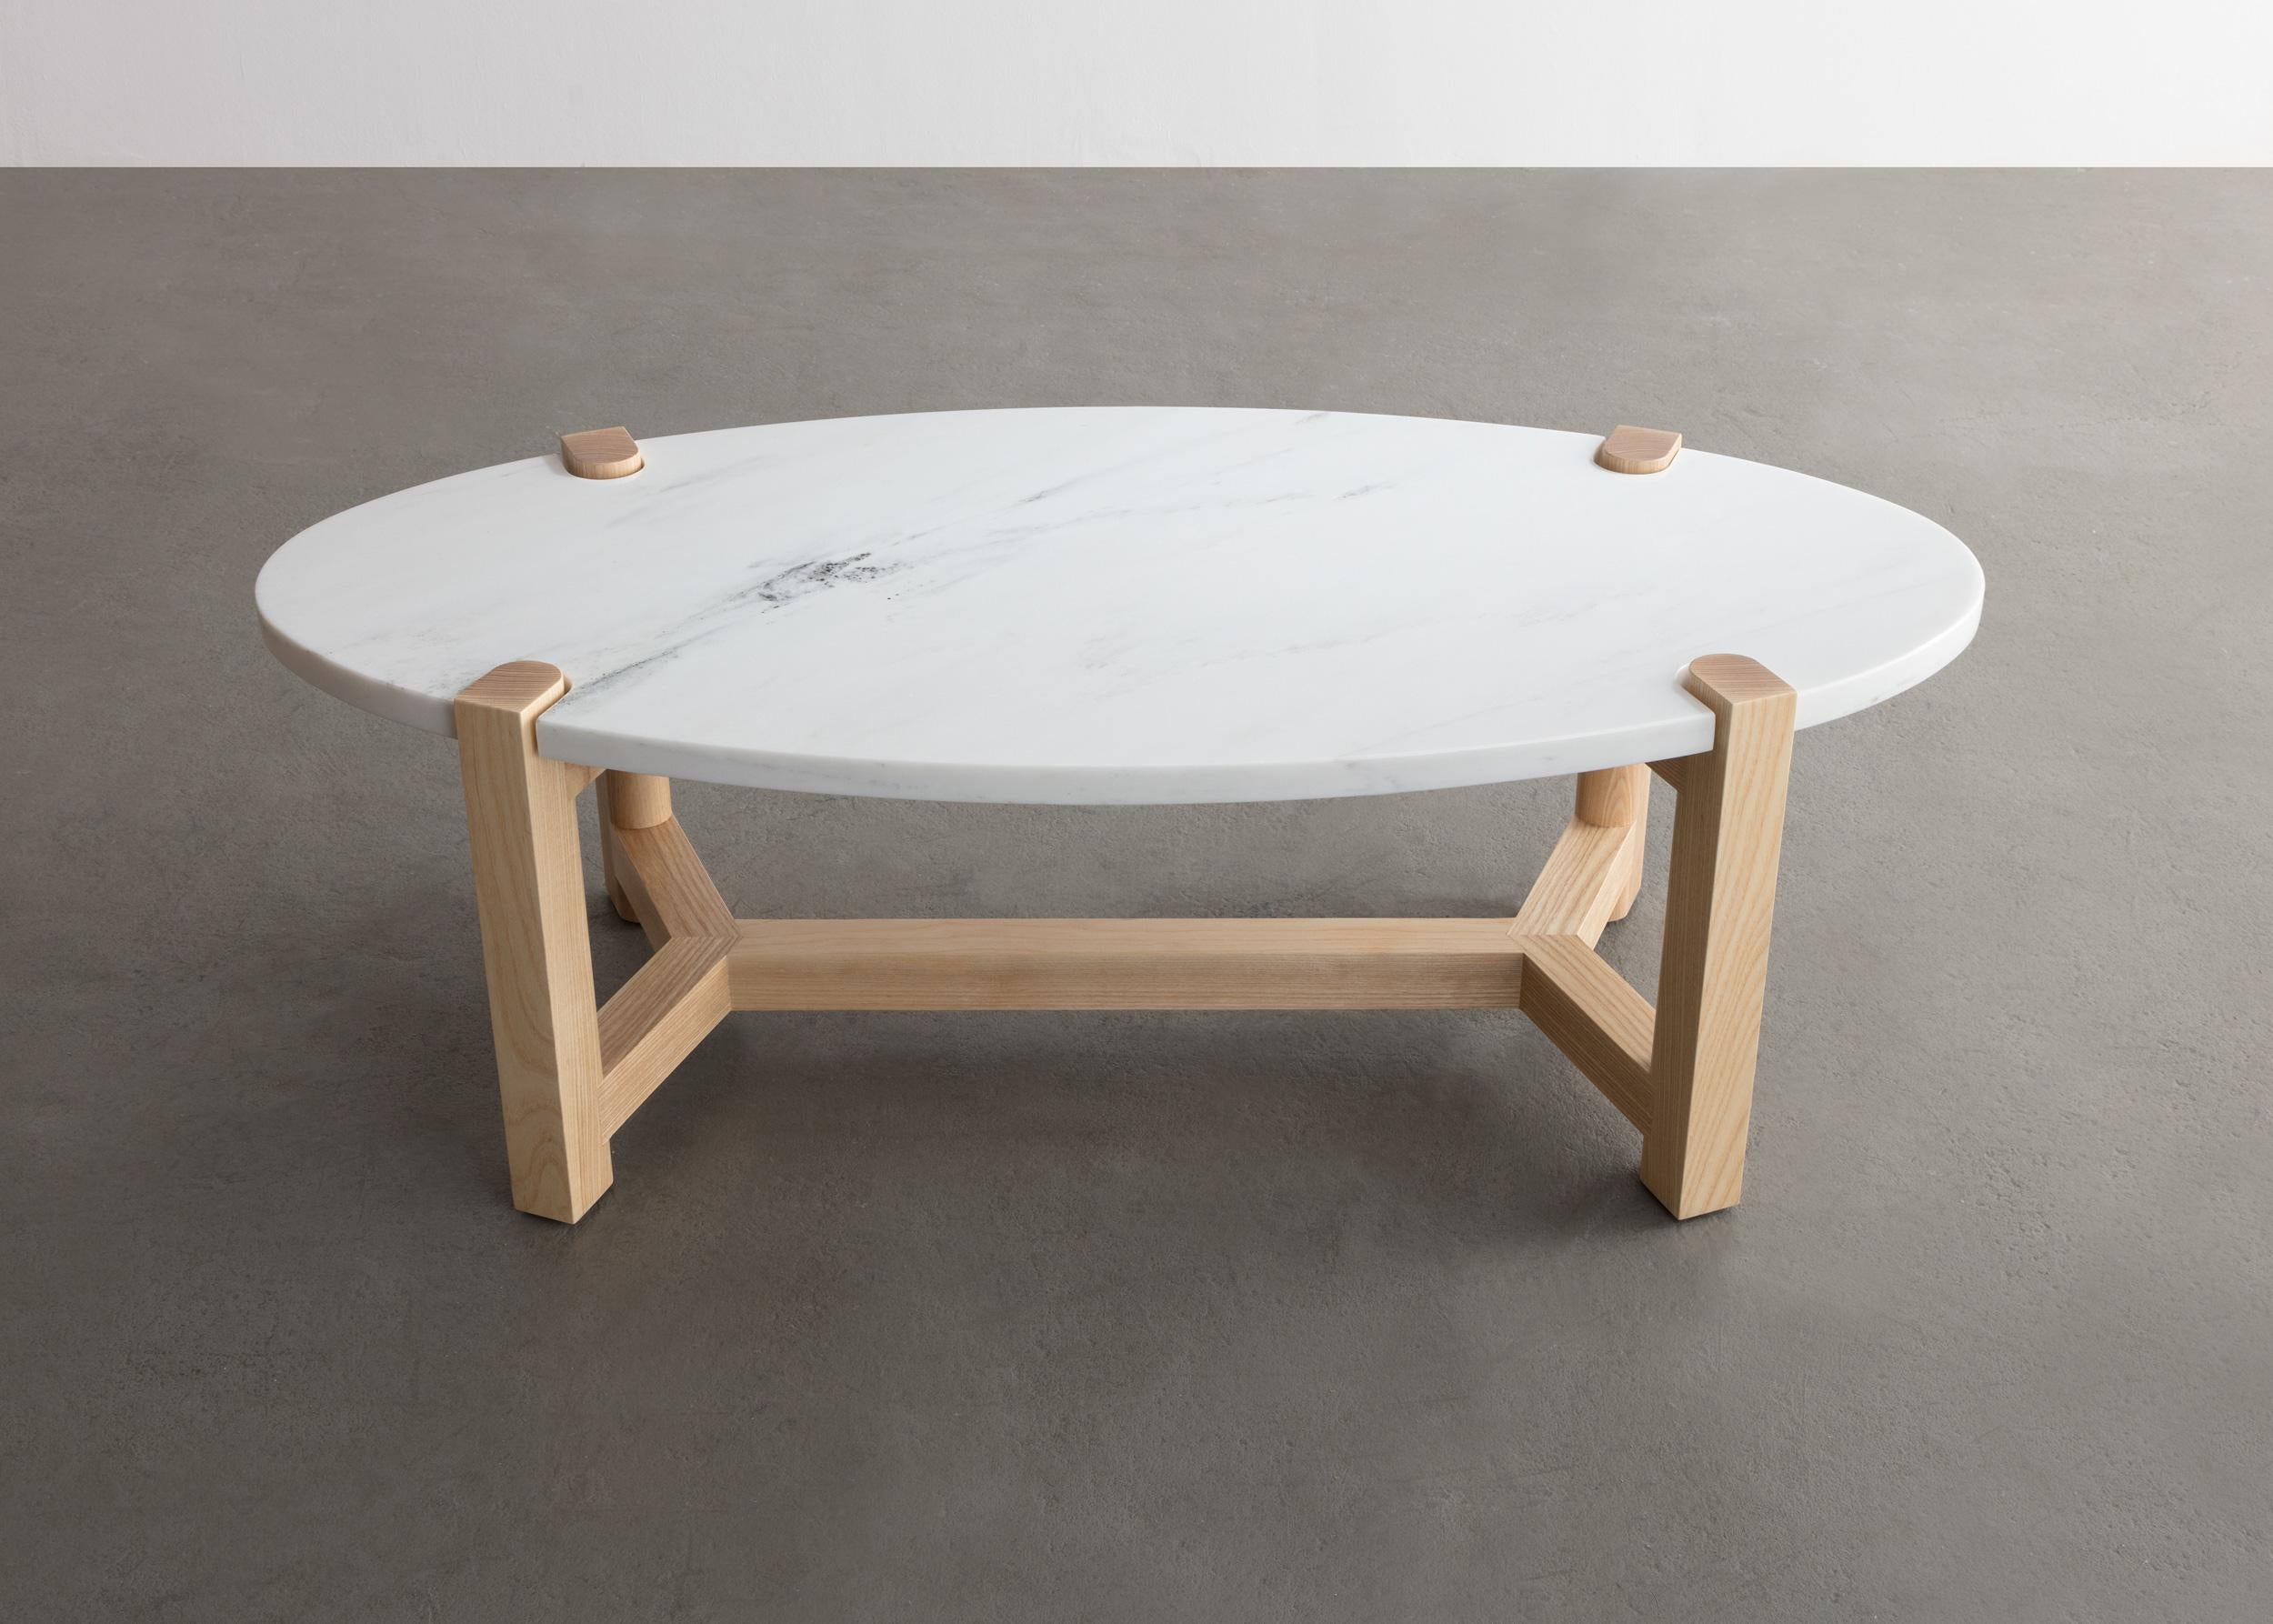 Pierce Coffee Table, Marble, Maple Hardwood, Oval, Made in USA 3